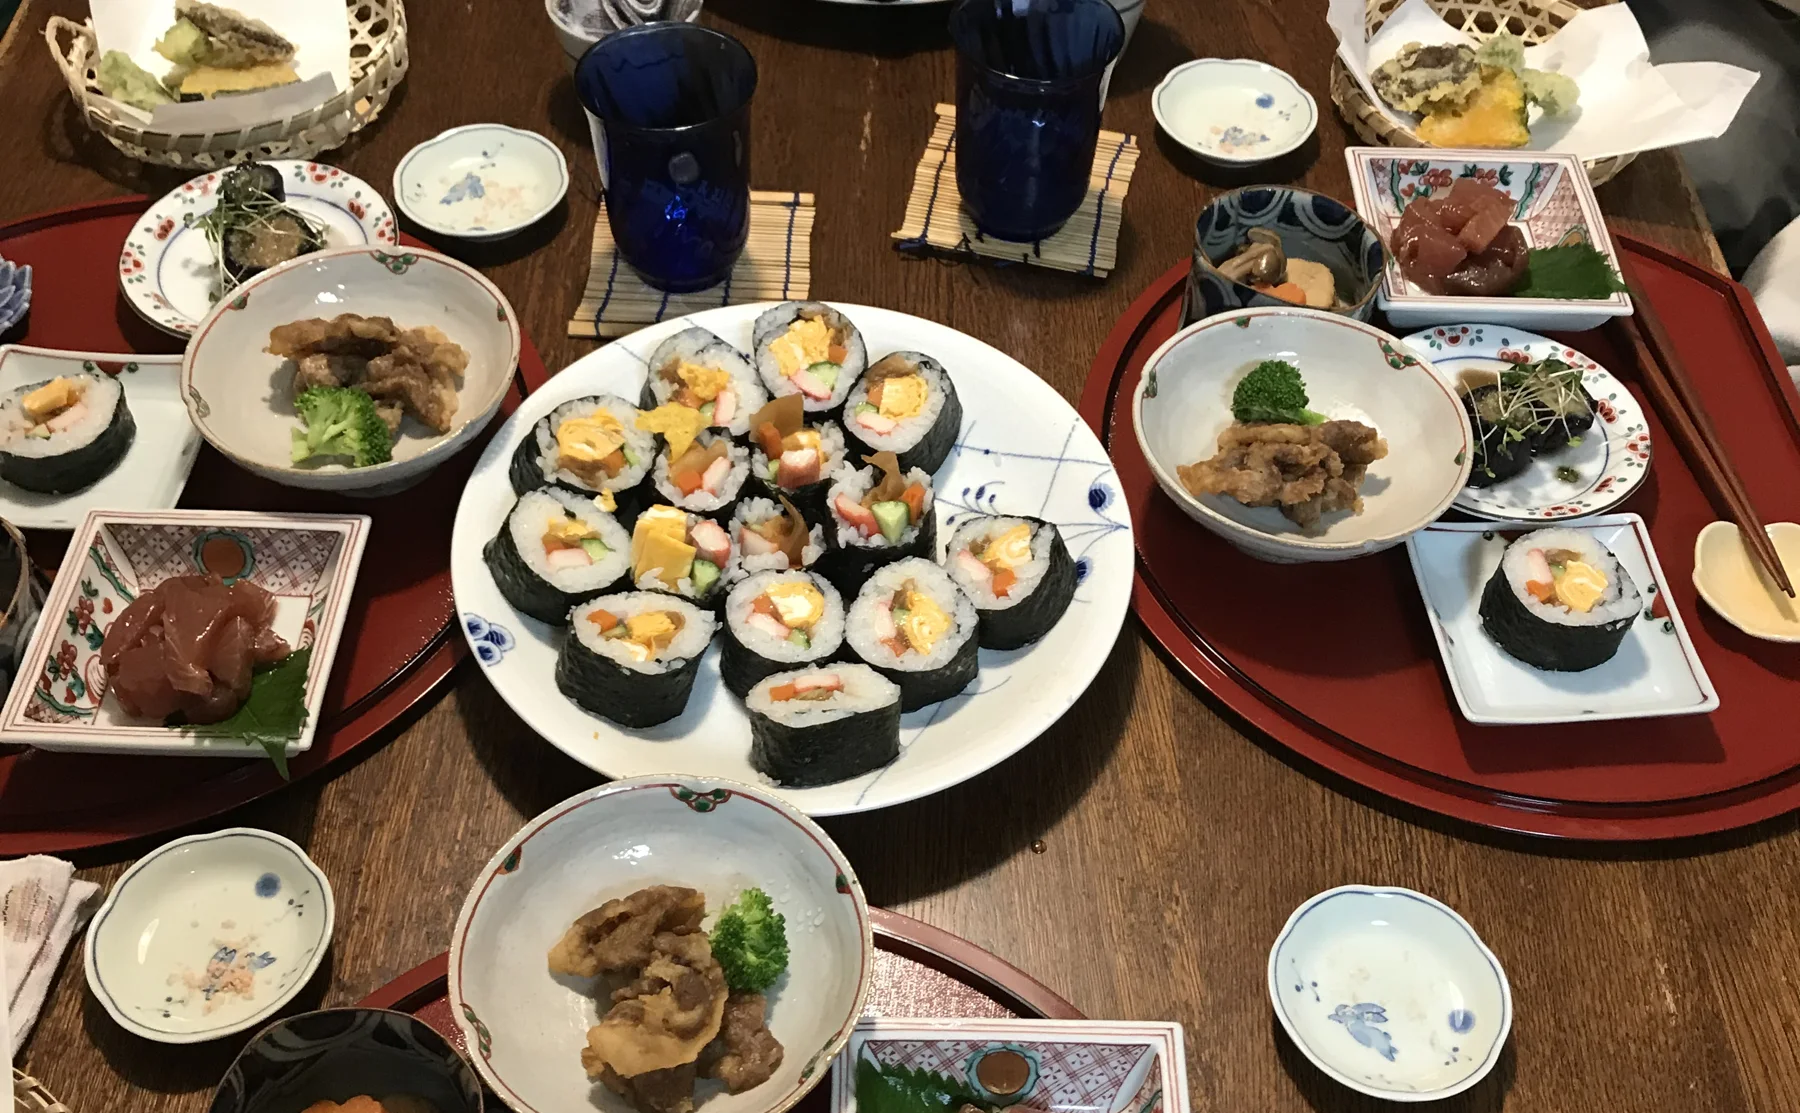 Cooking lesson of Norimaki, kinds of Japanese traditional sushi and dinner - 1266894